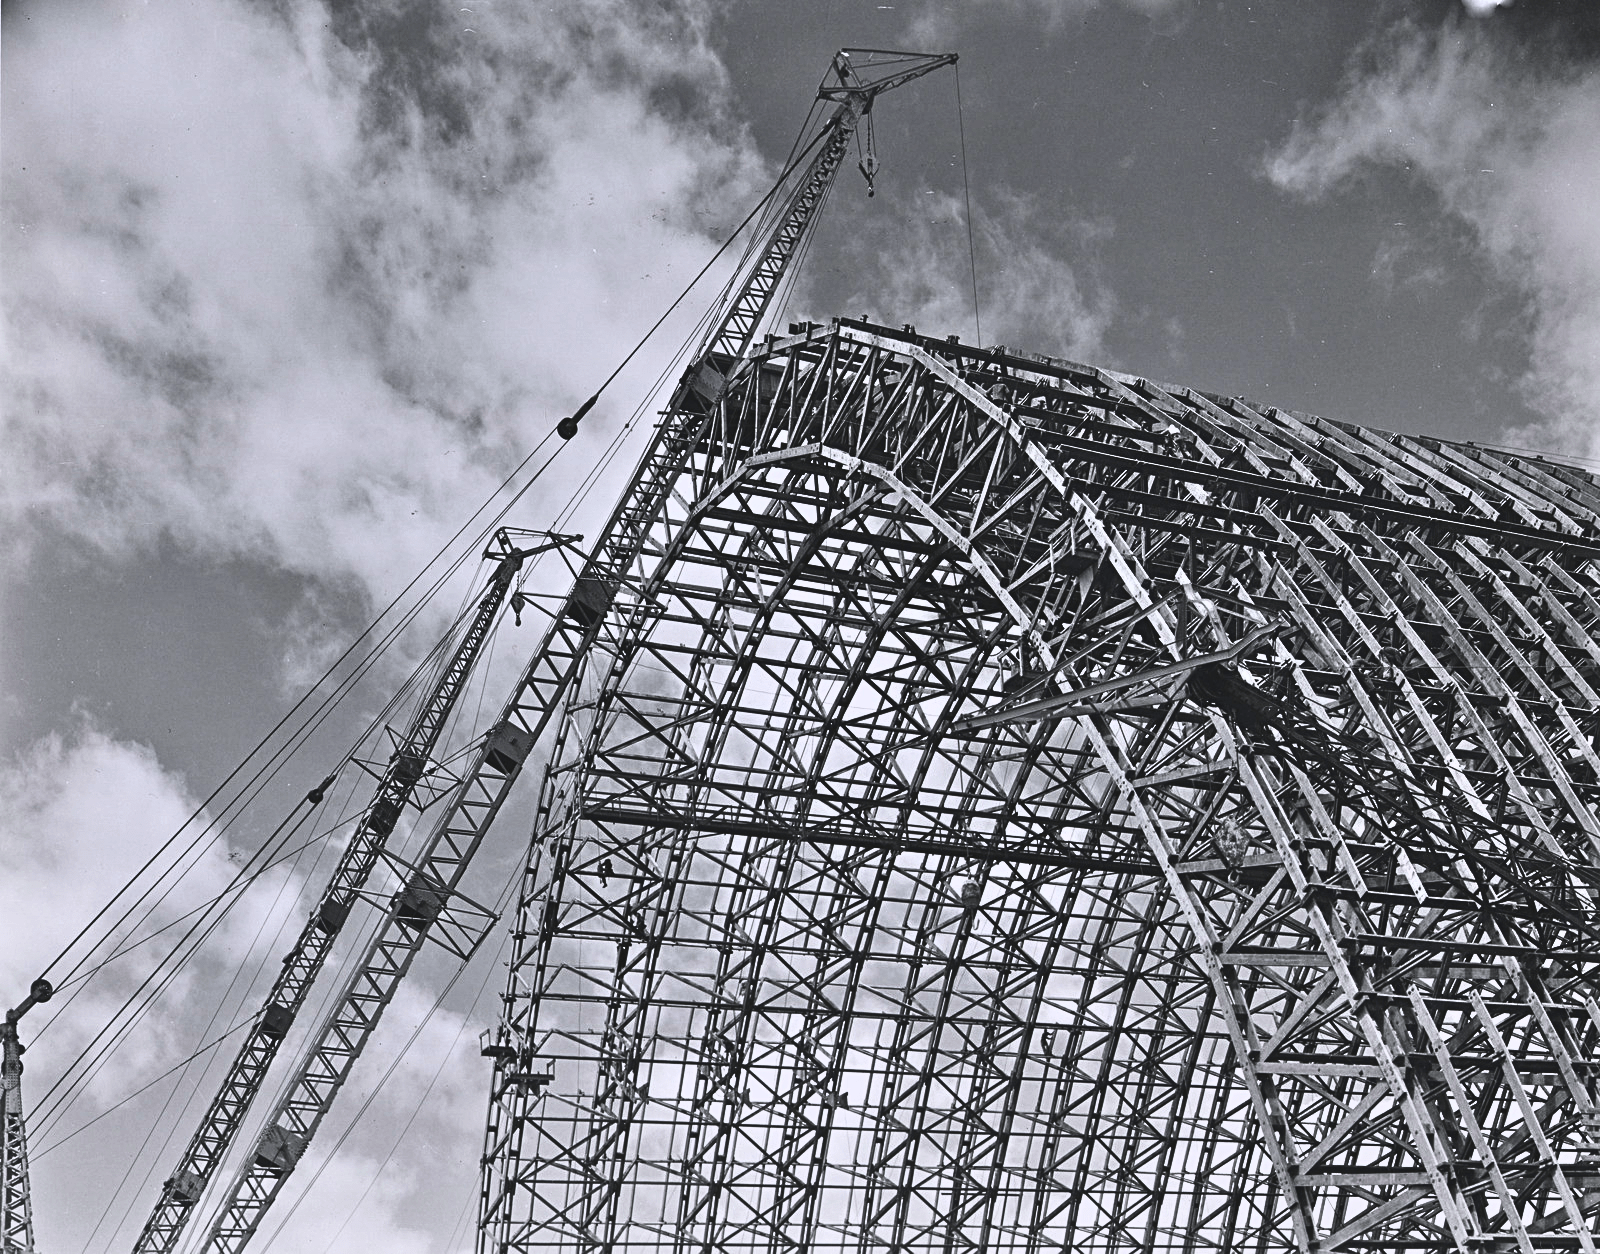 Tillamook Air Museum Hangar B during construction phase circa 1942. Timber construction, timber engineering and modern engineering practices all at work.